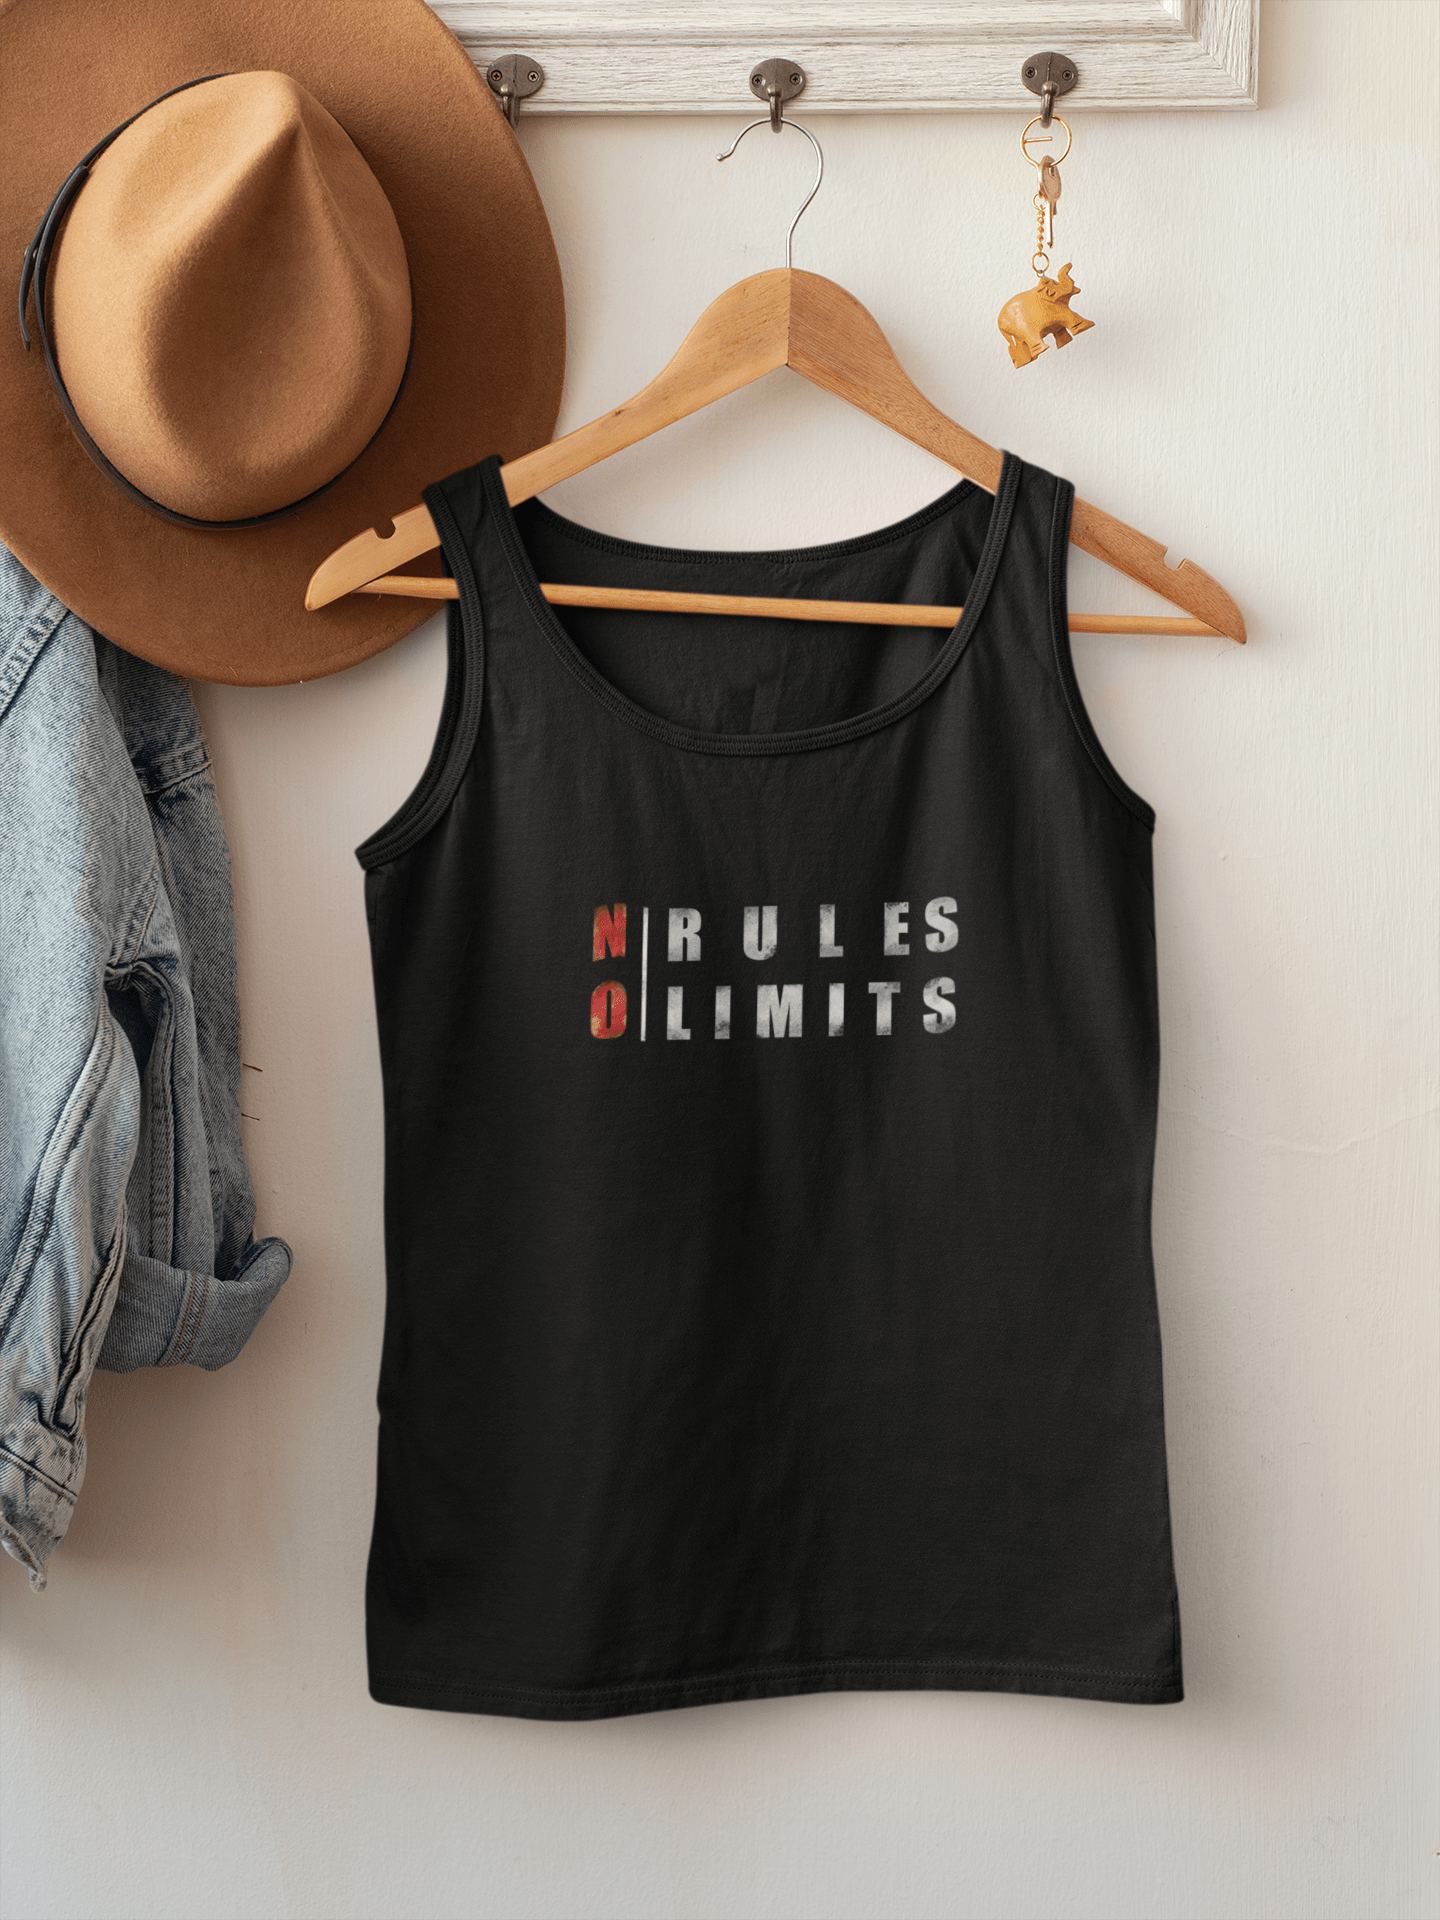 NO RULES, NO LIMITS: SLEEVELESS T-SHIRTS by ANTHERR BLACK